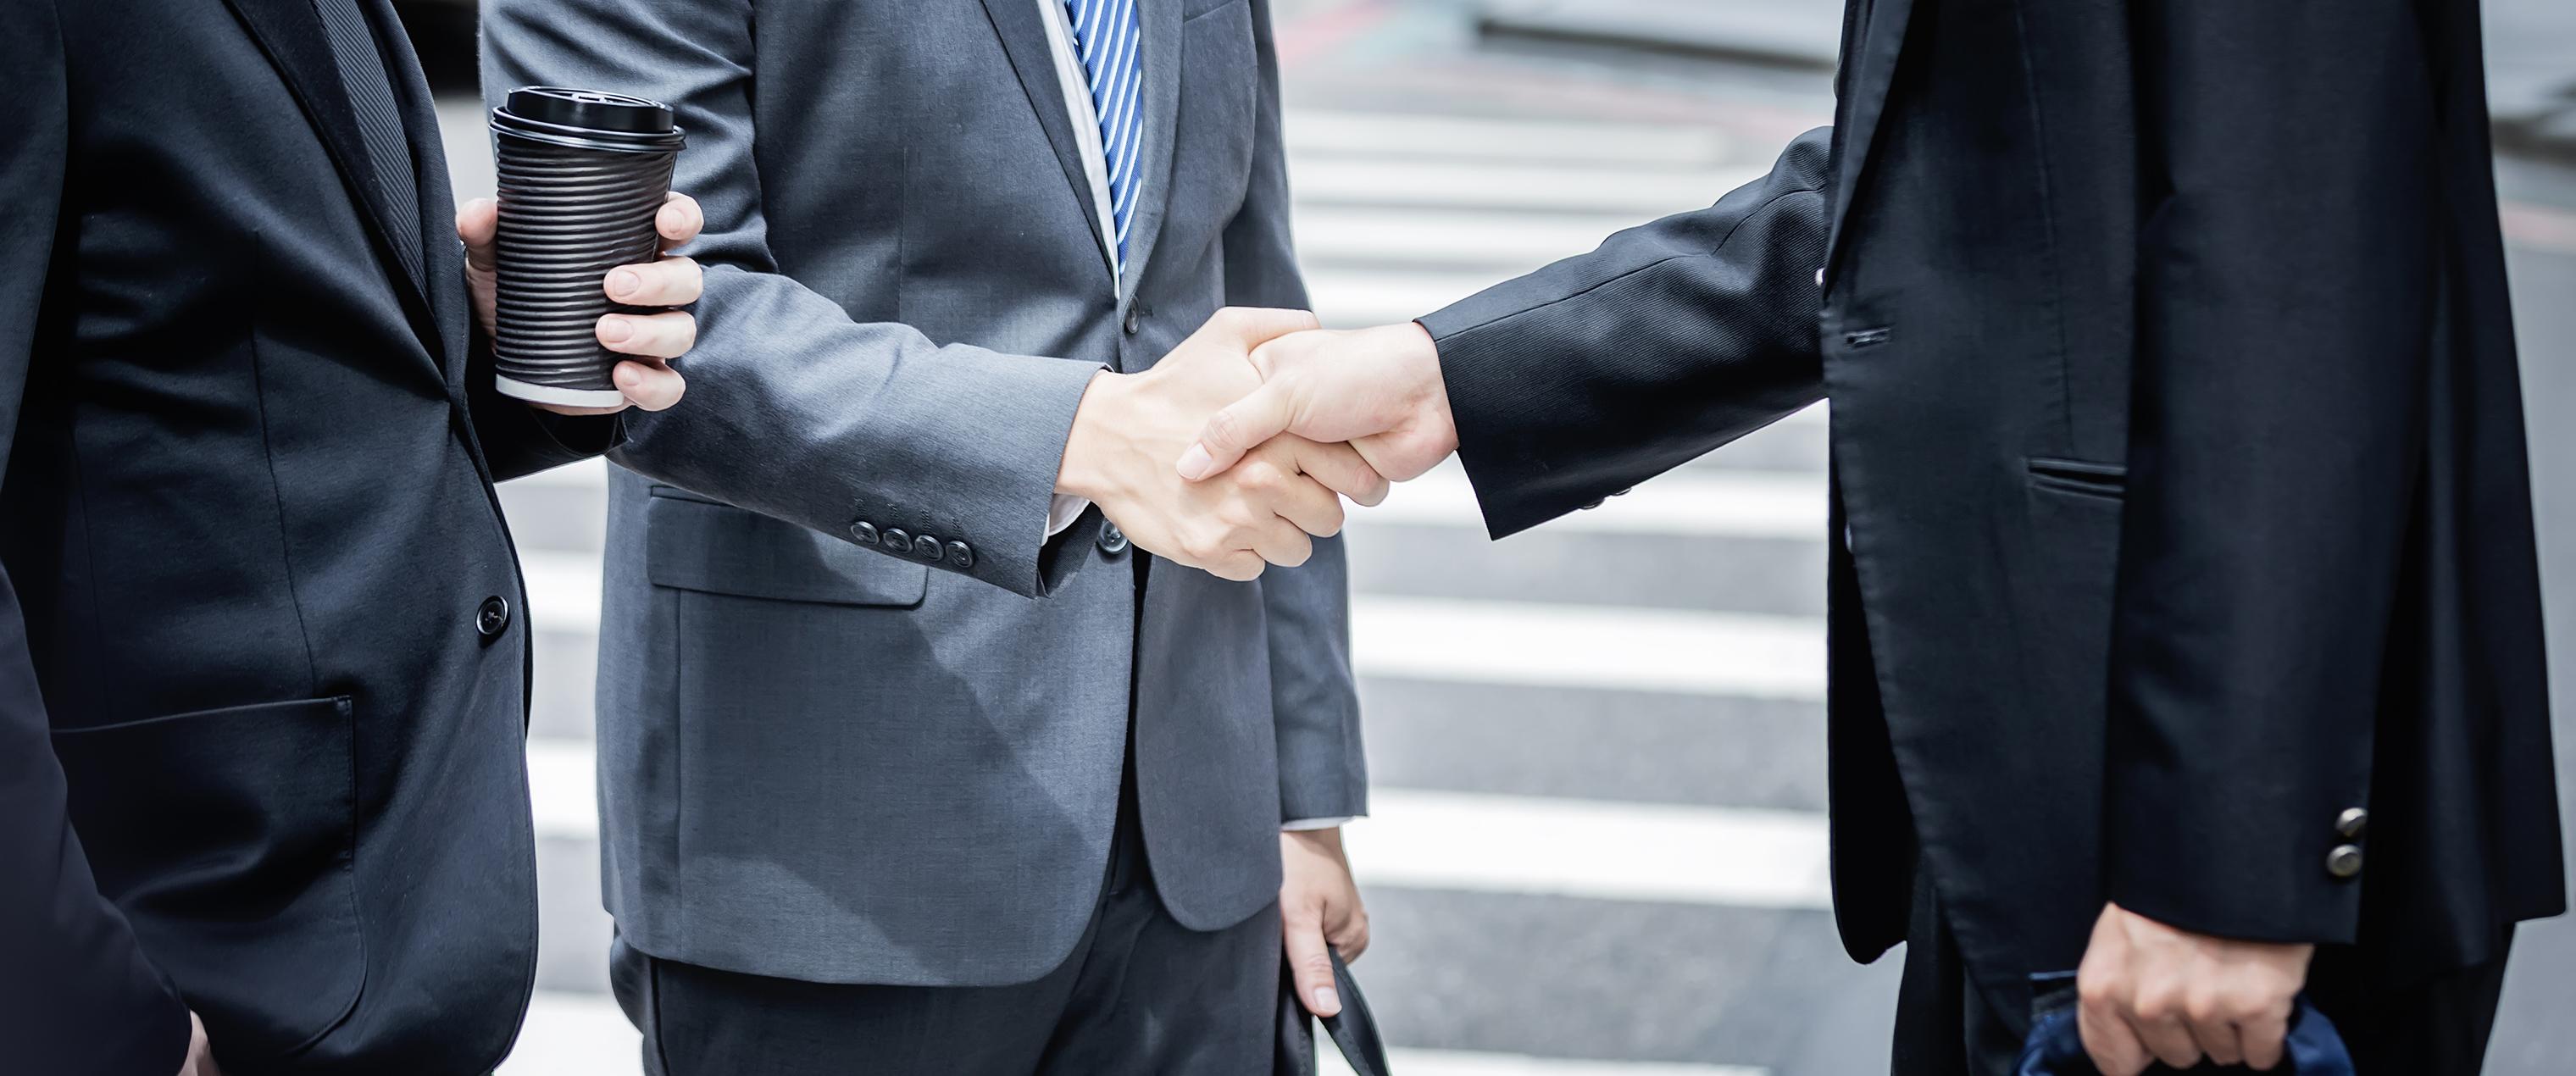 Financial professionals shaking hands